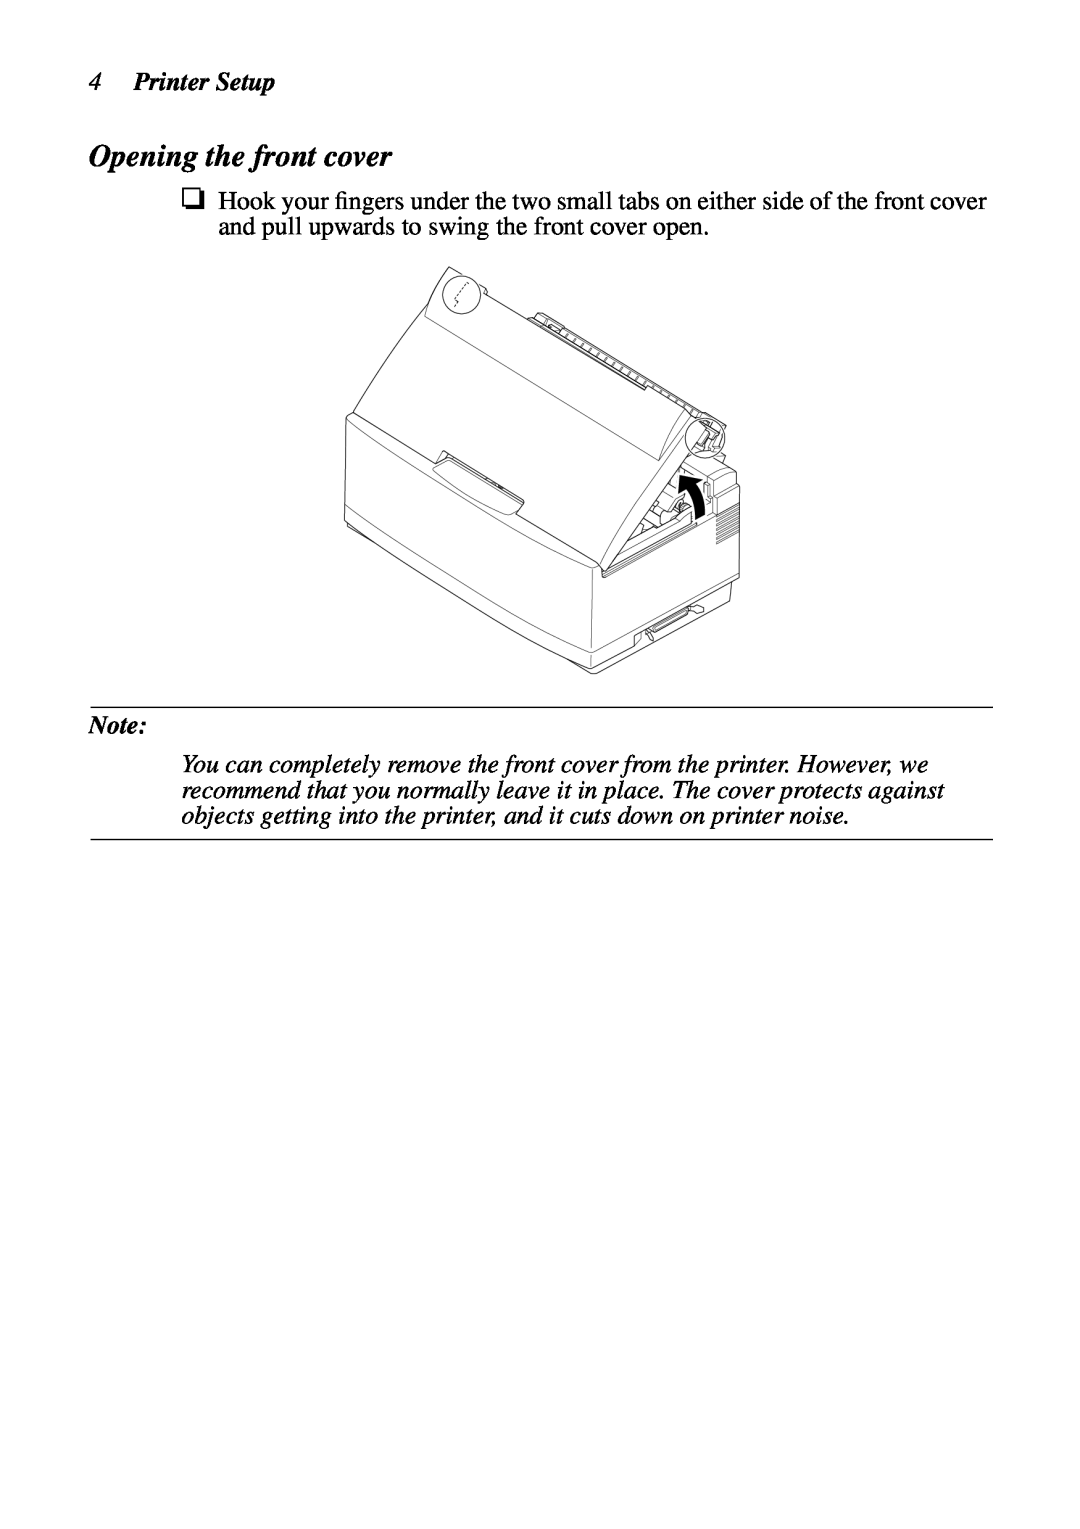 Star Micronics LC-90 NX-1010 user manual Opening the front cover, Printer Setup 